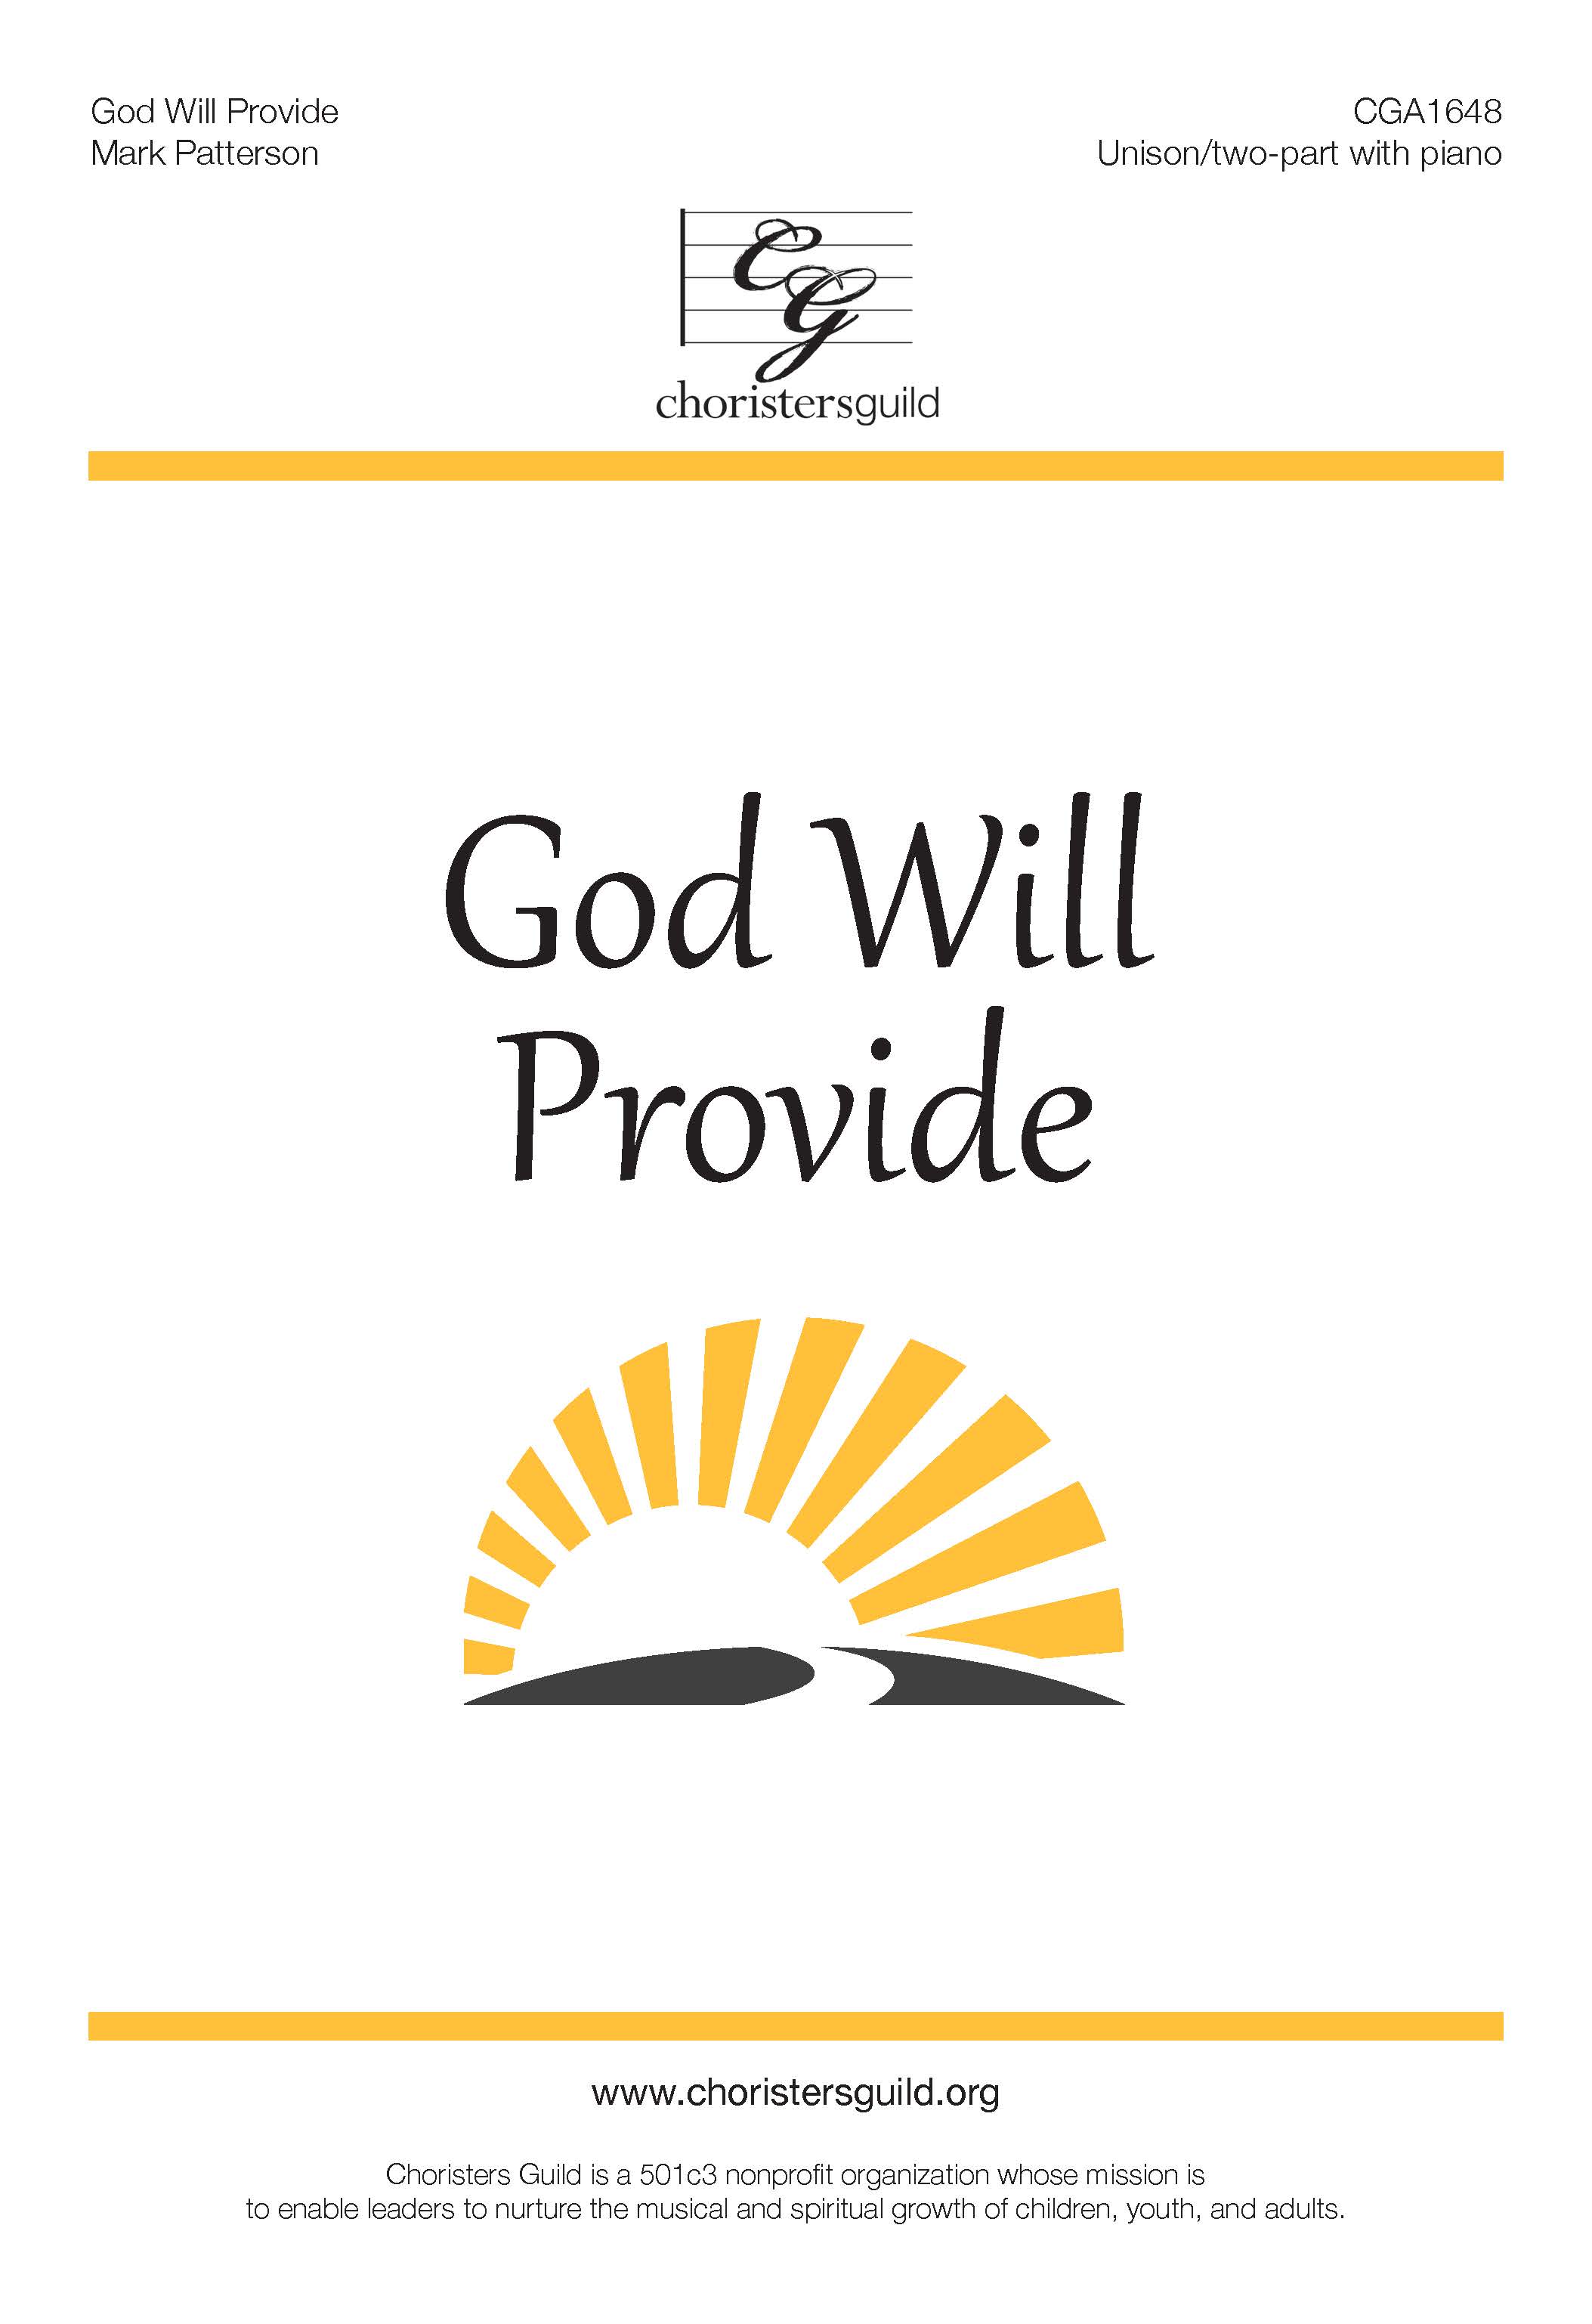 God Will Provide - Unison/Two-part